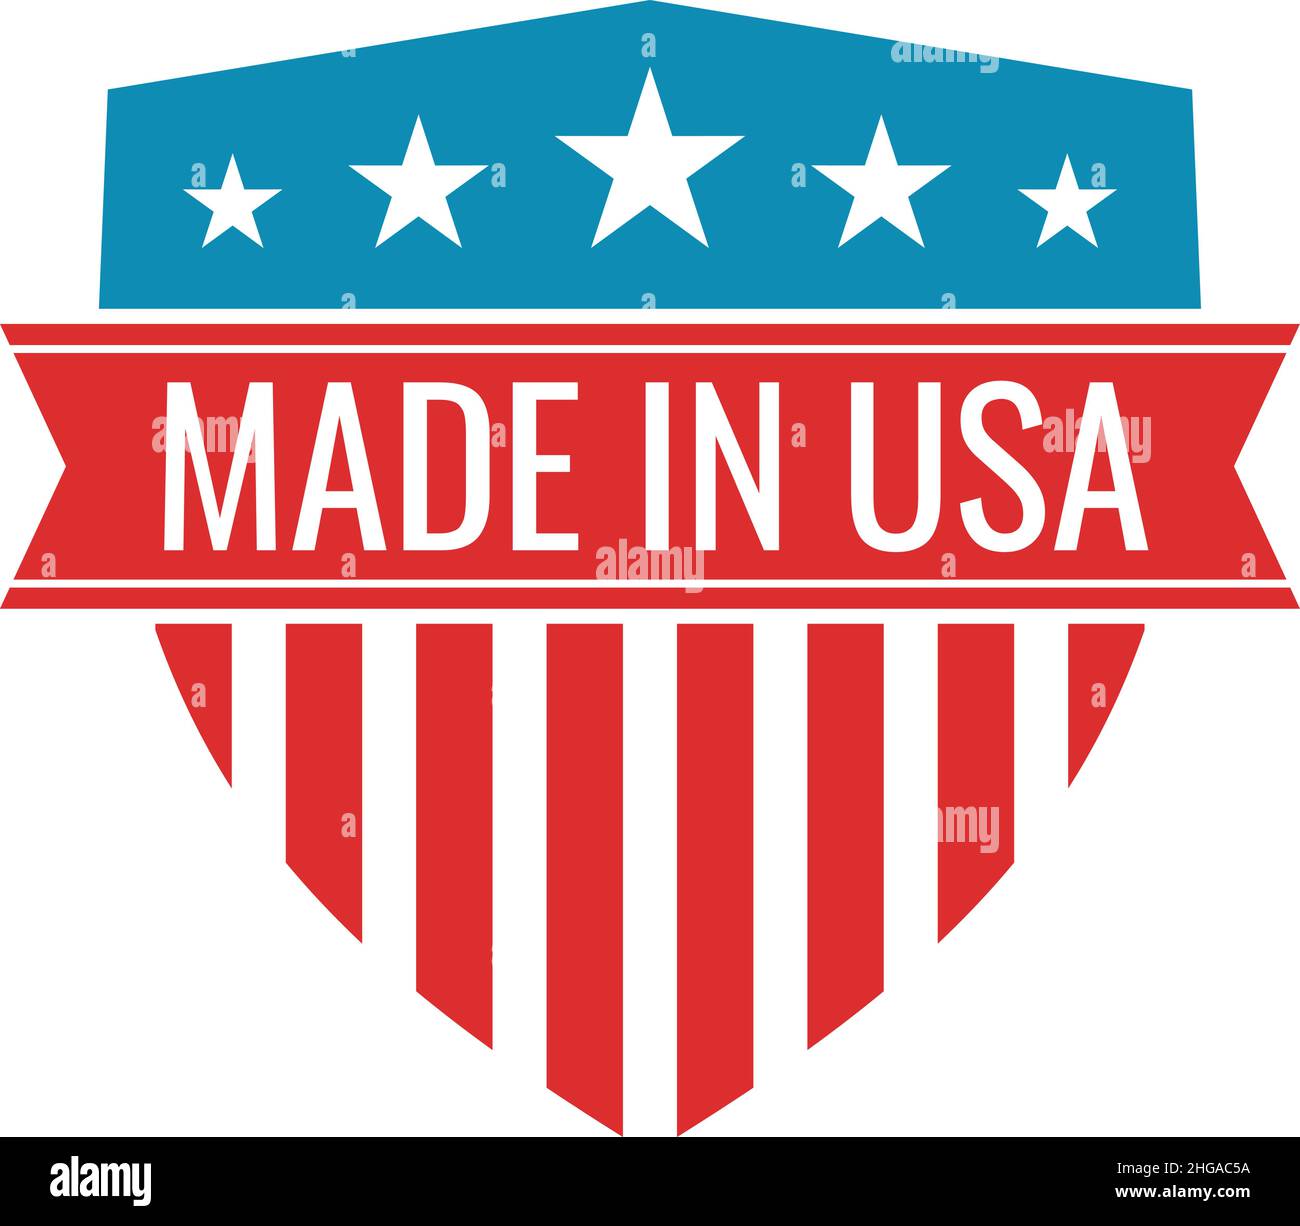 Made in USA banner. Shield emblem in american flag style Stock Vector